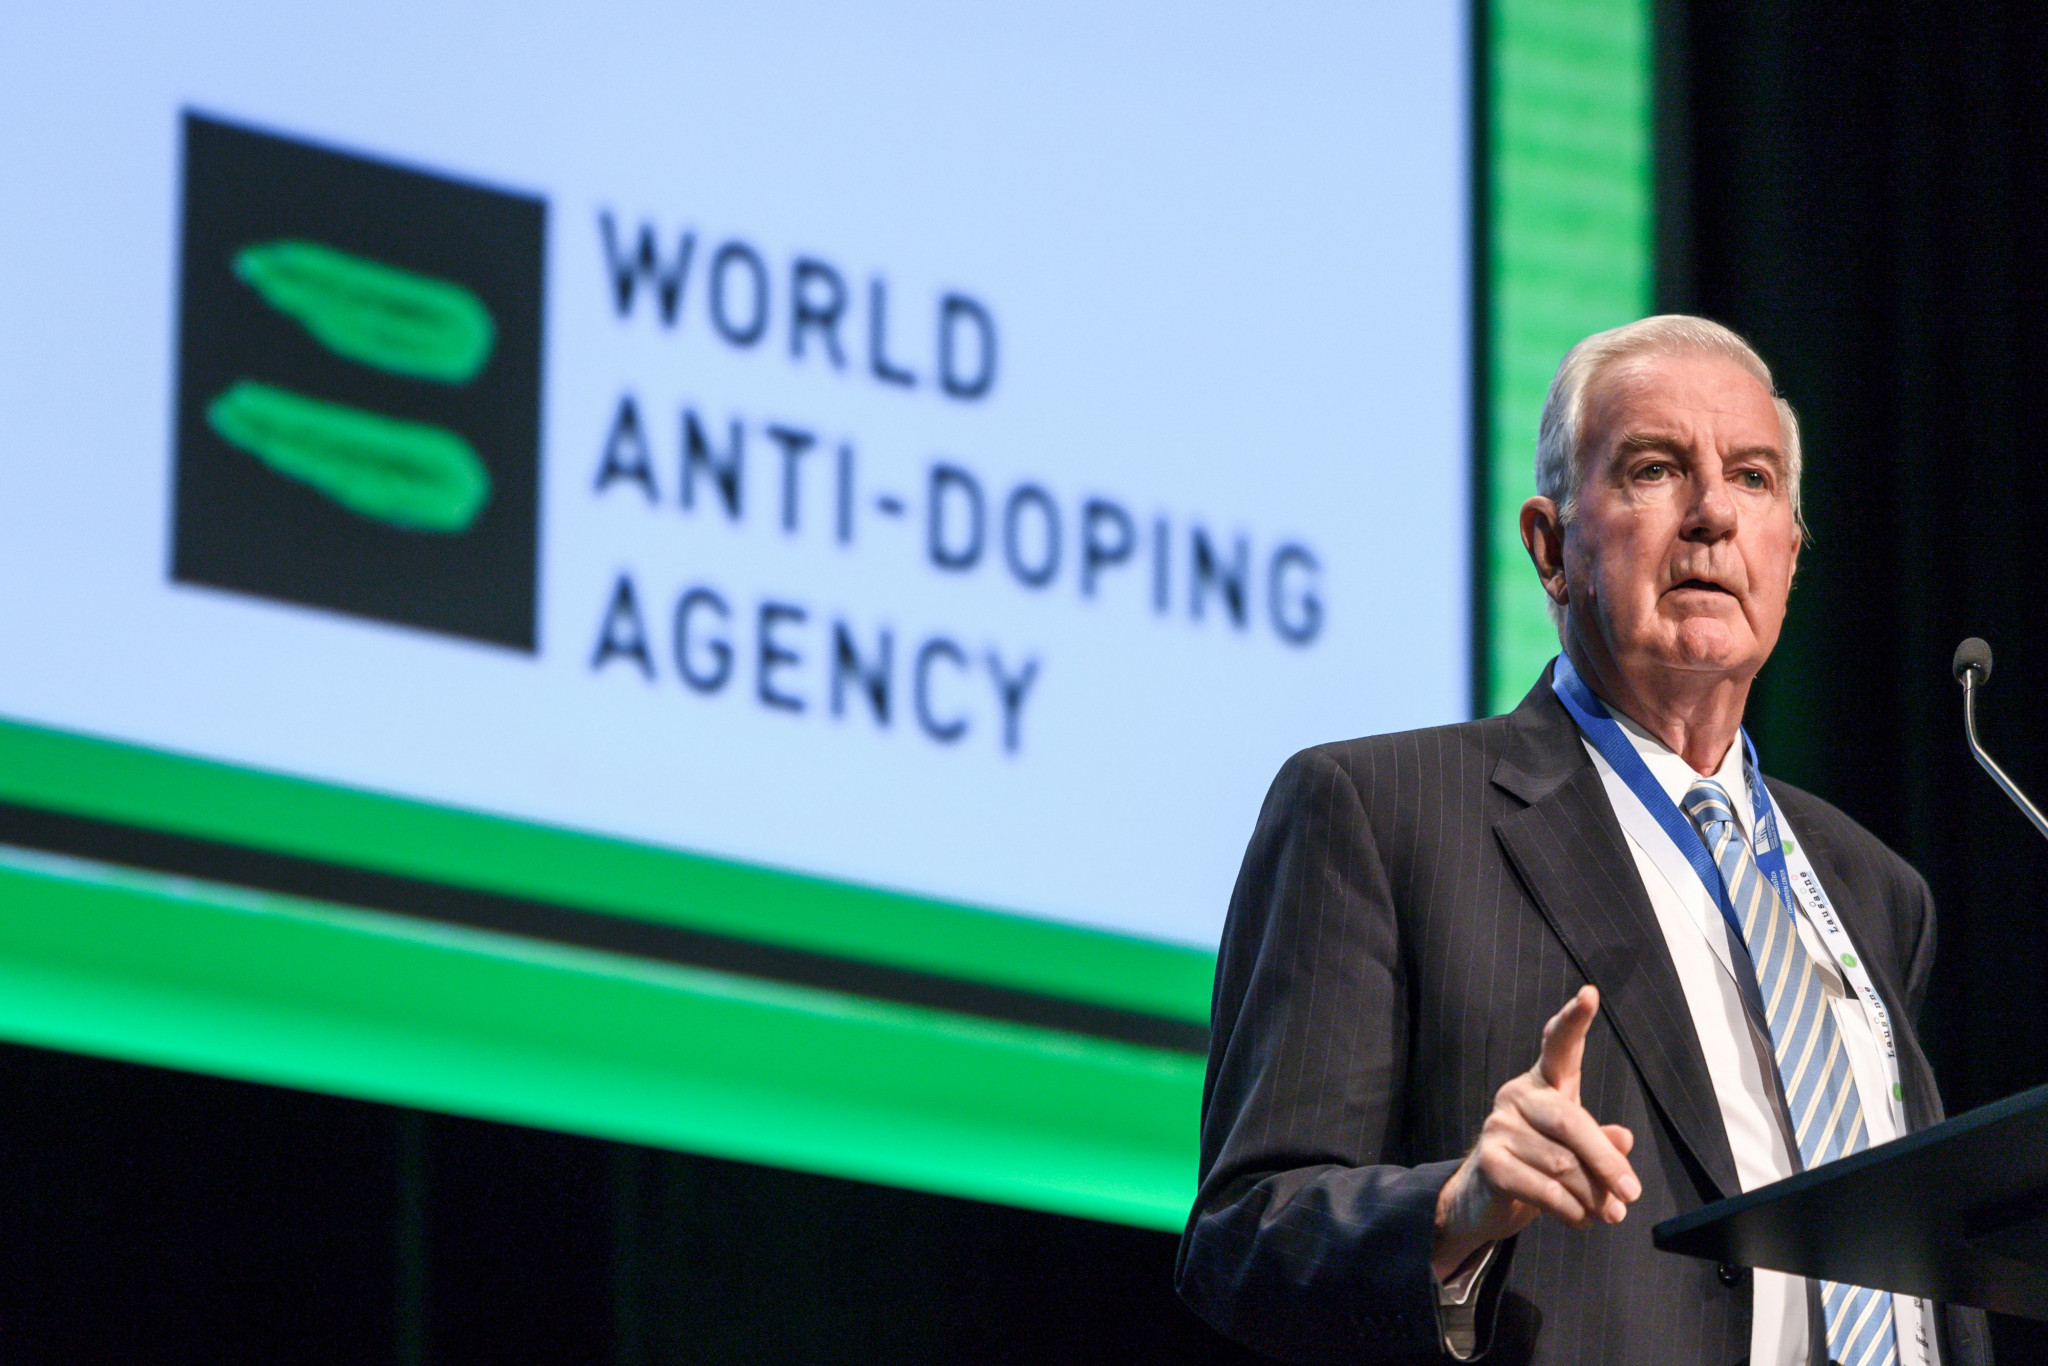 The World Anti-Doping Agency has announced that online registration is now open for its Annual Symposium ©Getty Images